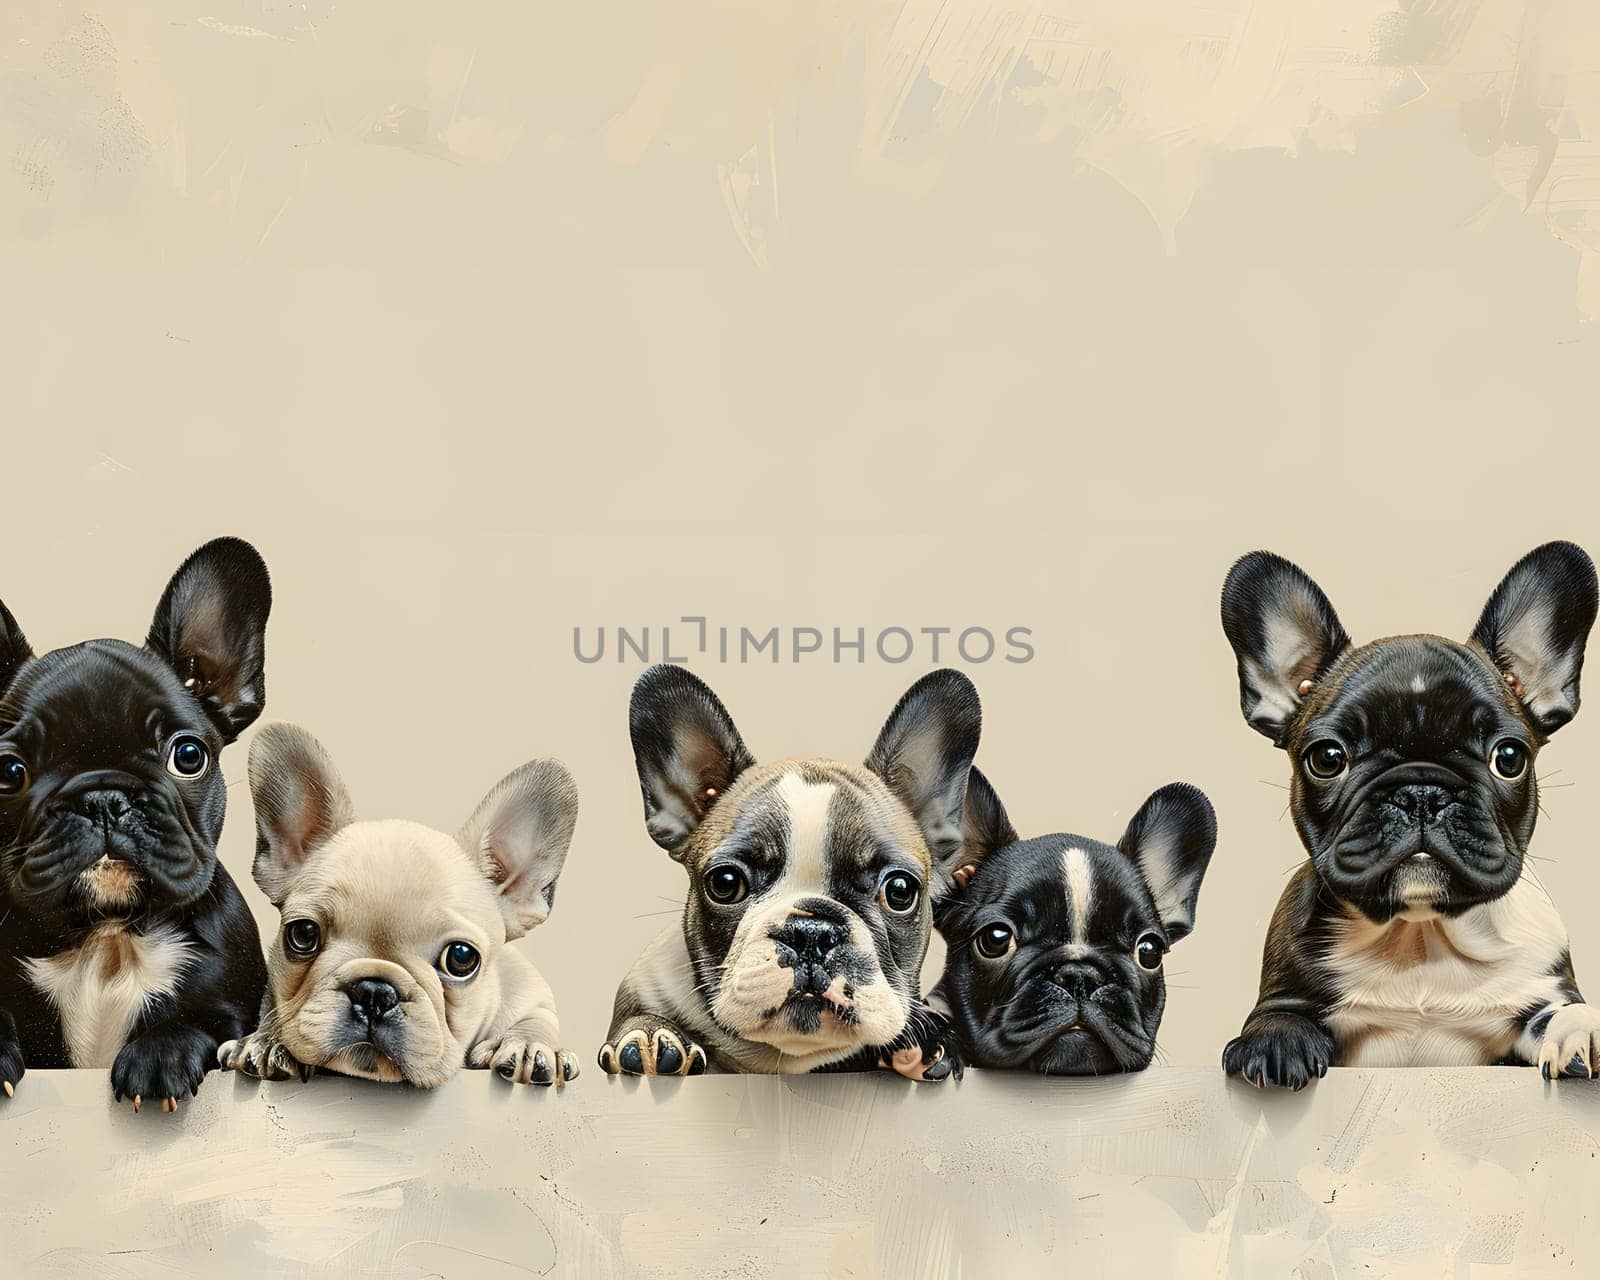 A line of French Bulldogs, a small toy dog breed, are gazing at the camera with their fawn coats and distinctive batlike ears and snouts, showcasing their role as companion dogs